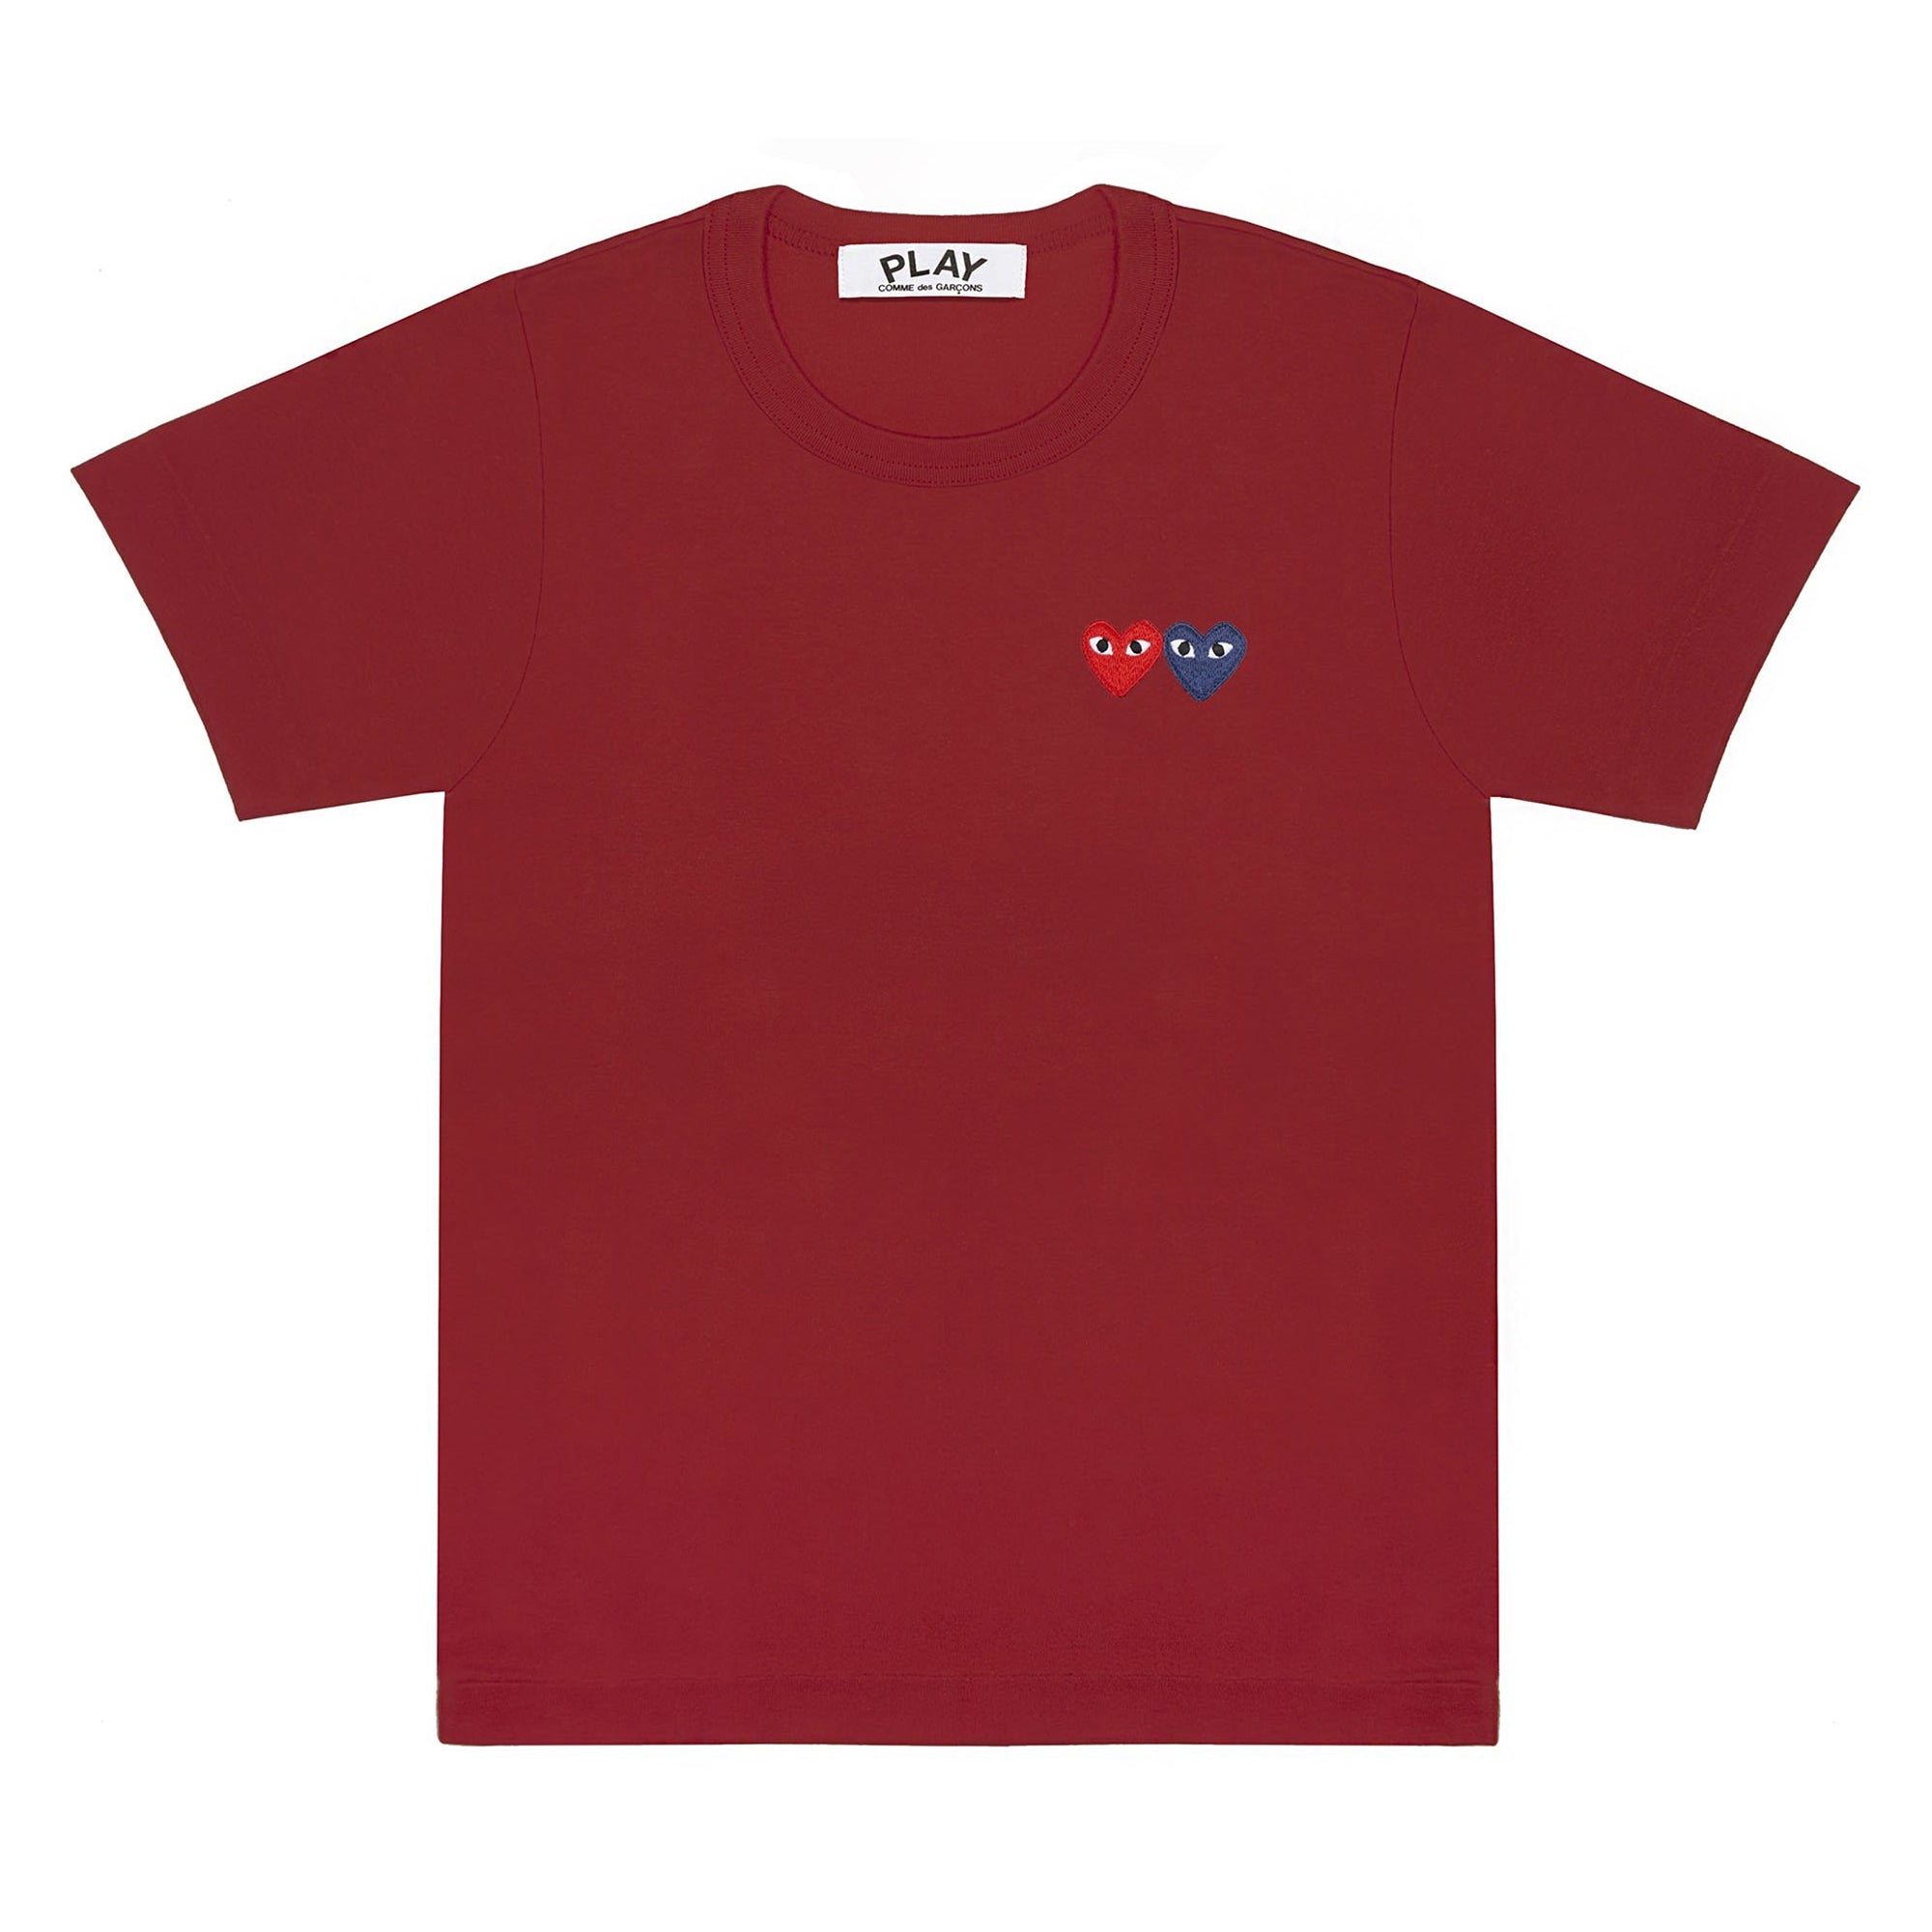 PLAY CDG - T-Shirt With Double Heart - (Burgundy) view 1